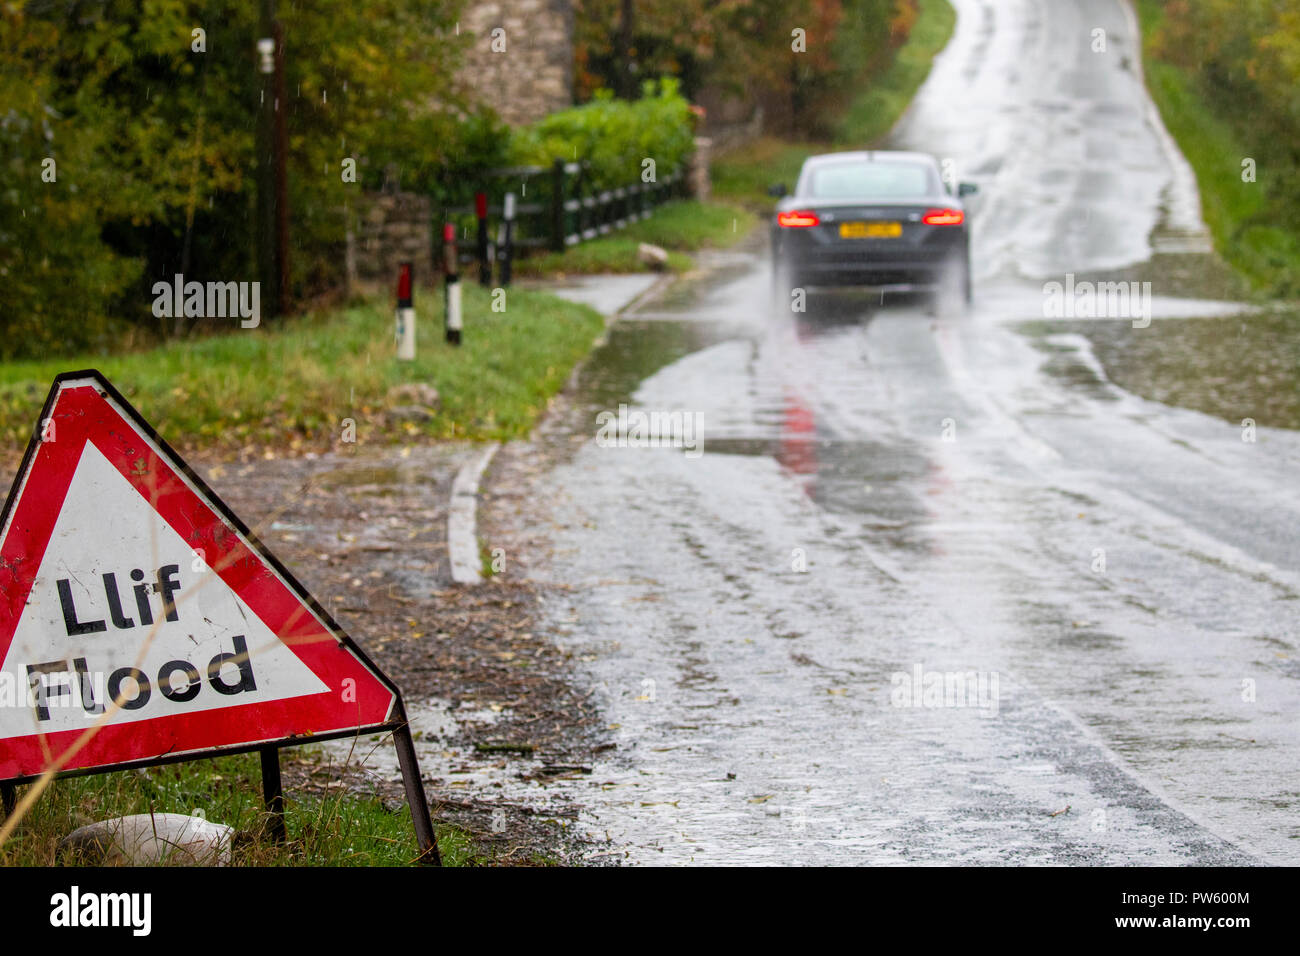 Flintshire, North Wales, 13th October 2018. UK Weather: Heavy rain for most today with weather warnings in place and flood warnings for parts of Wales. Heavy rain and flooding along rural roads near to the village of Lixwm, Flintshire as a car drives cautiously through flood water © DGDImages/AlamyNews Stock Photo